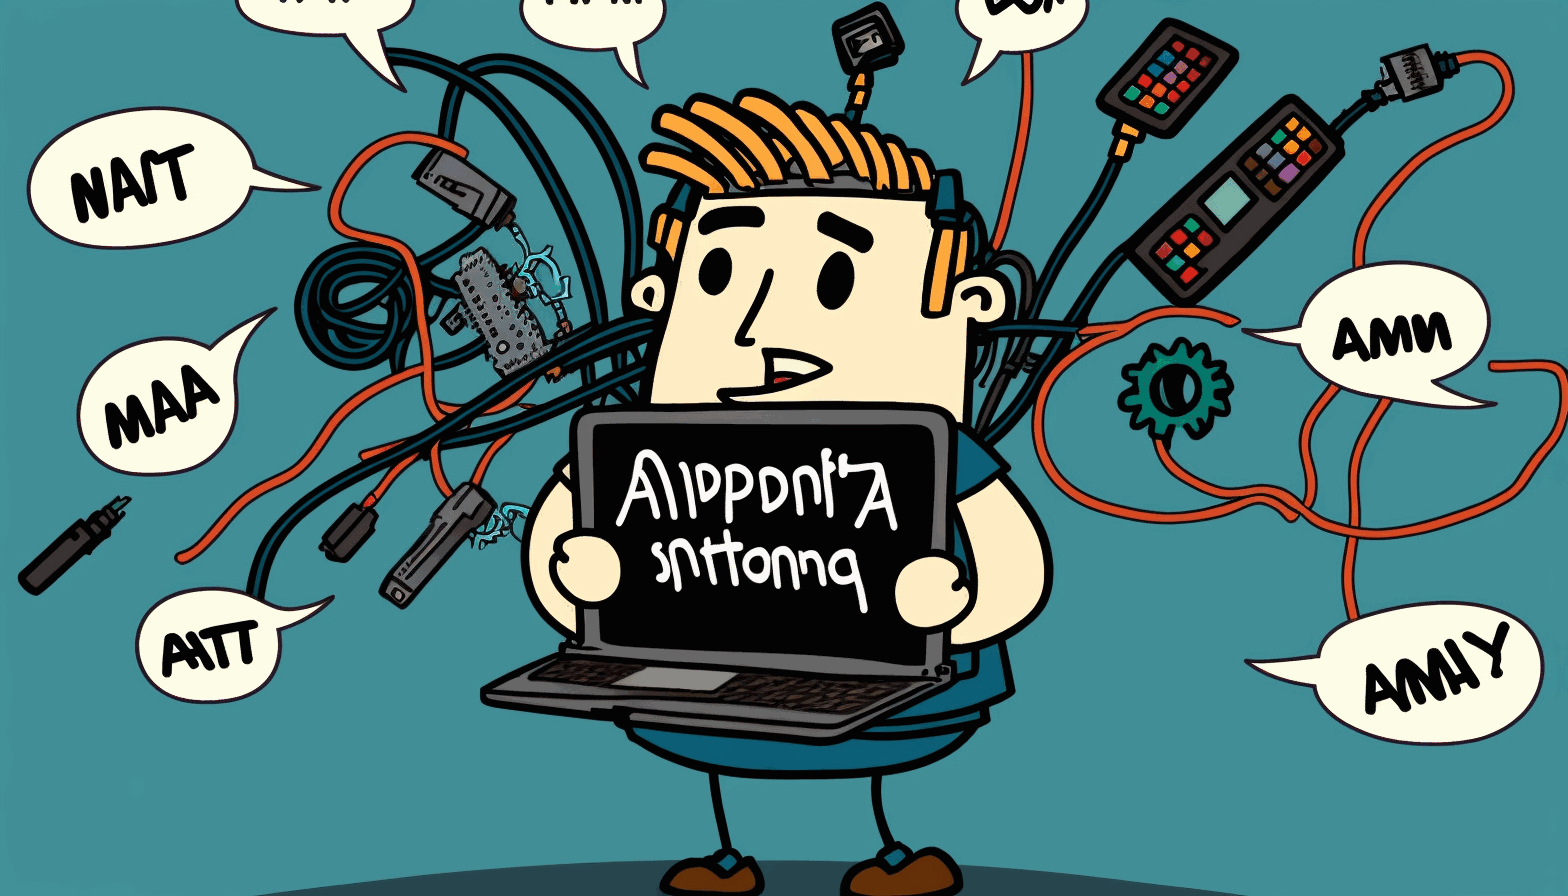 A cartoon image of a person holding a laptop while surrounded by various computer hardware components and networking cables, with a thought bubble displaying a series of CompTIA A+ acronyms and troubleshooting procedures.